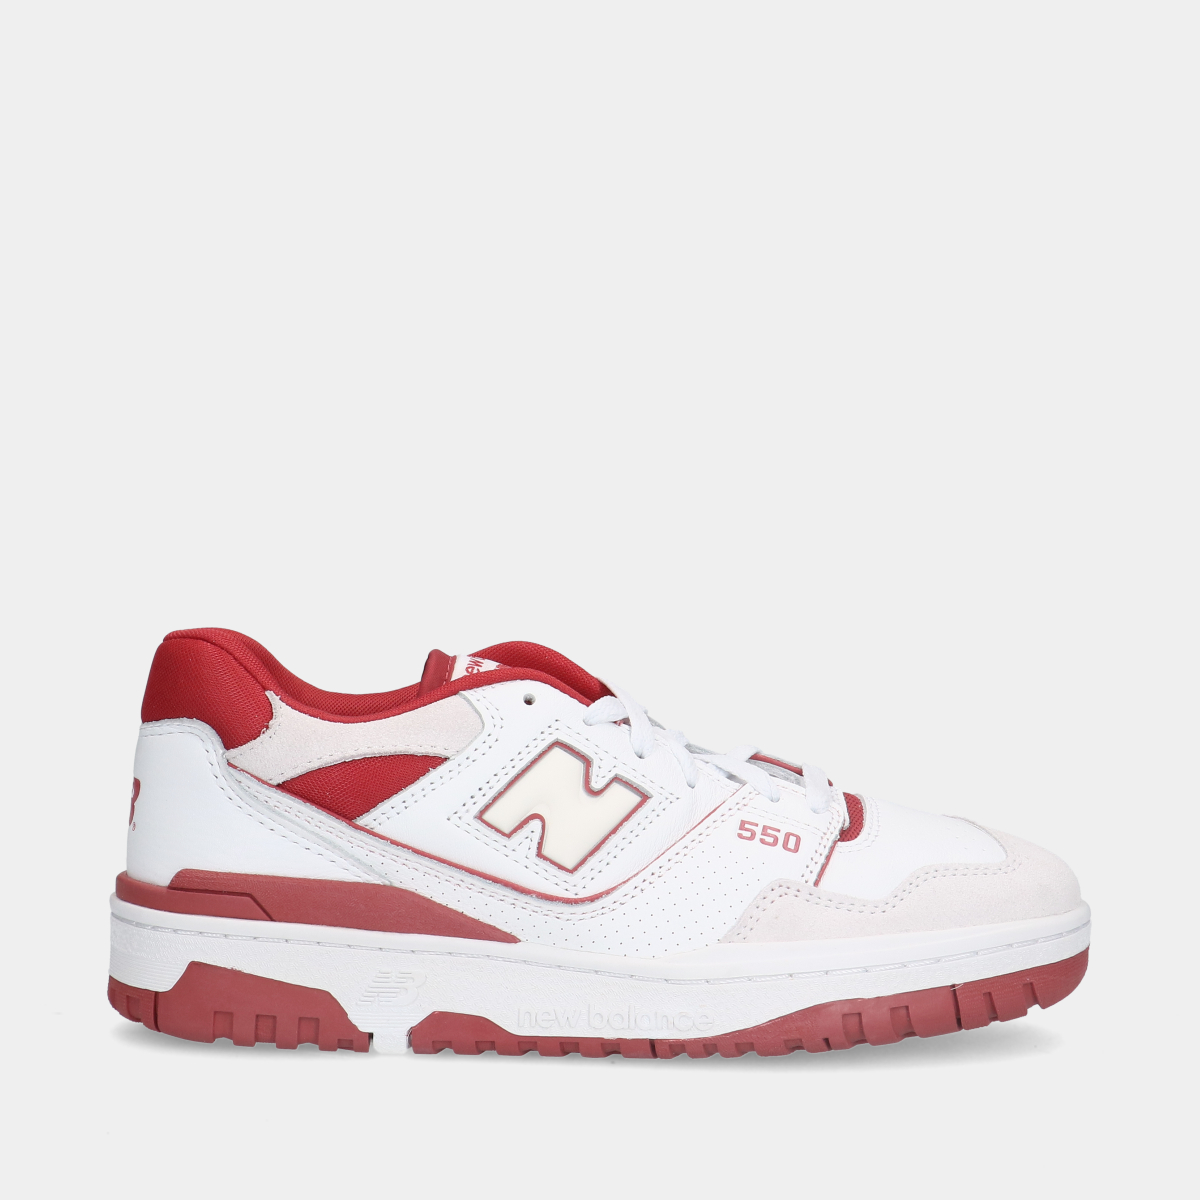 New Balance Sneakers New Balance 550 White Red sneakers